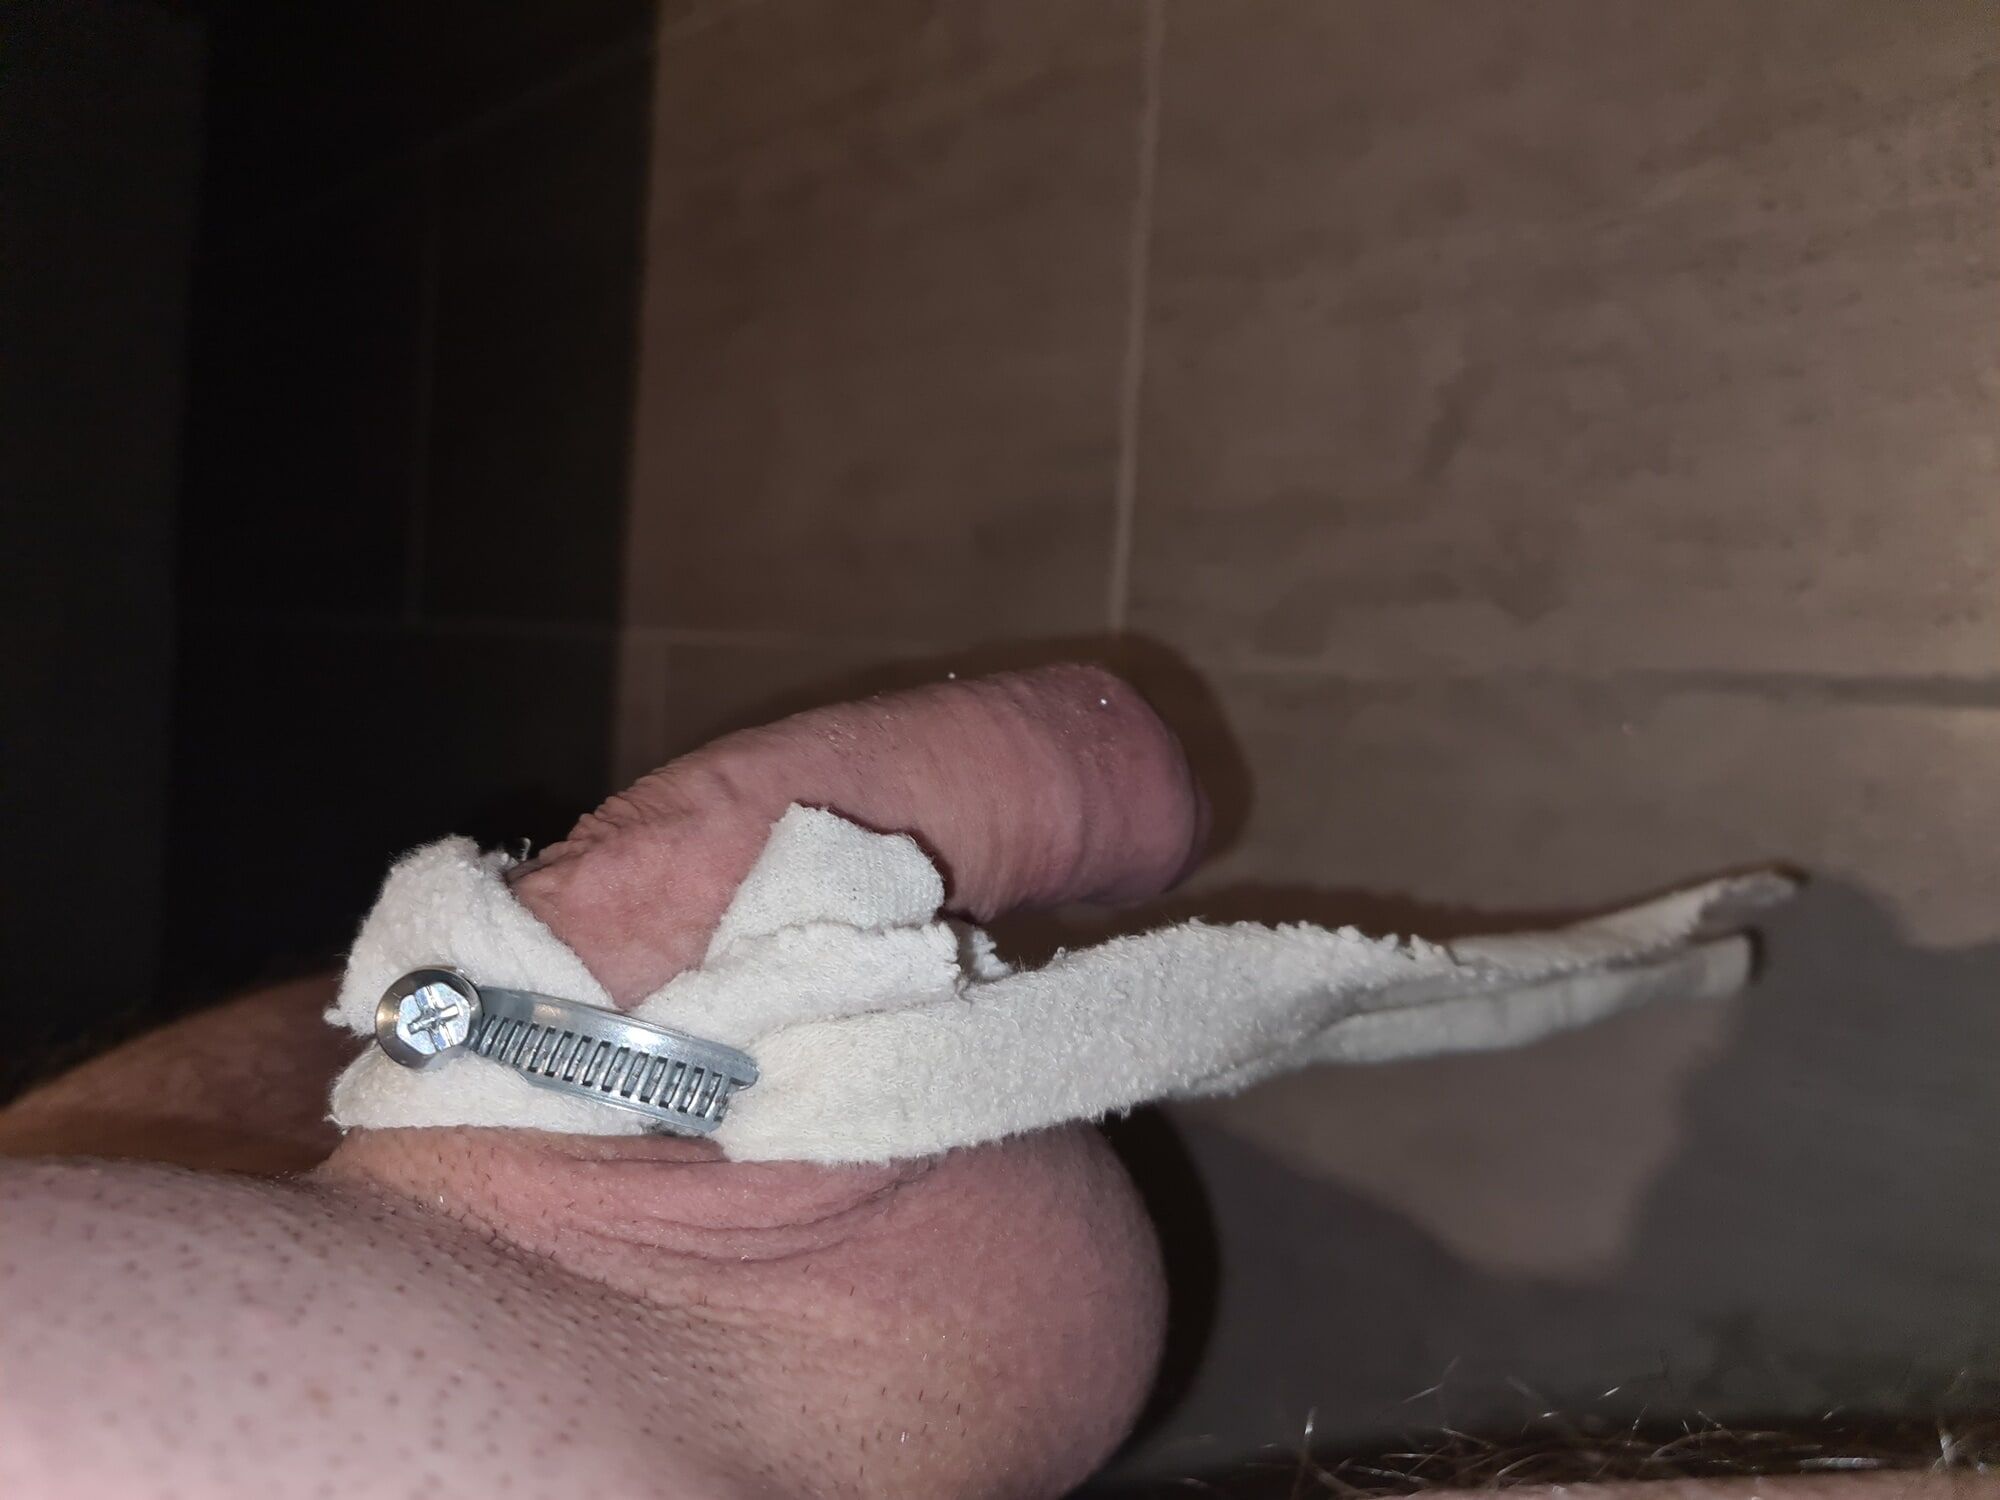 Penis banding session with hoseclamp #6